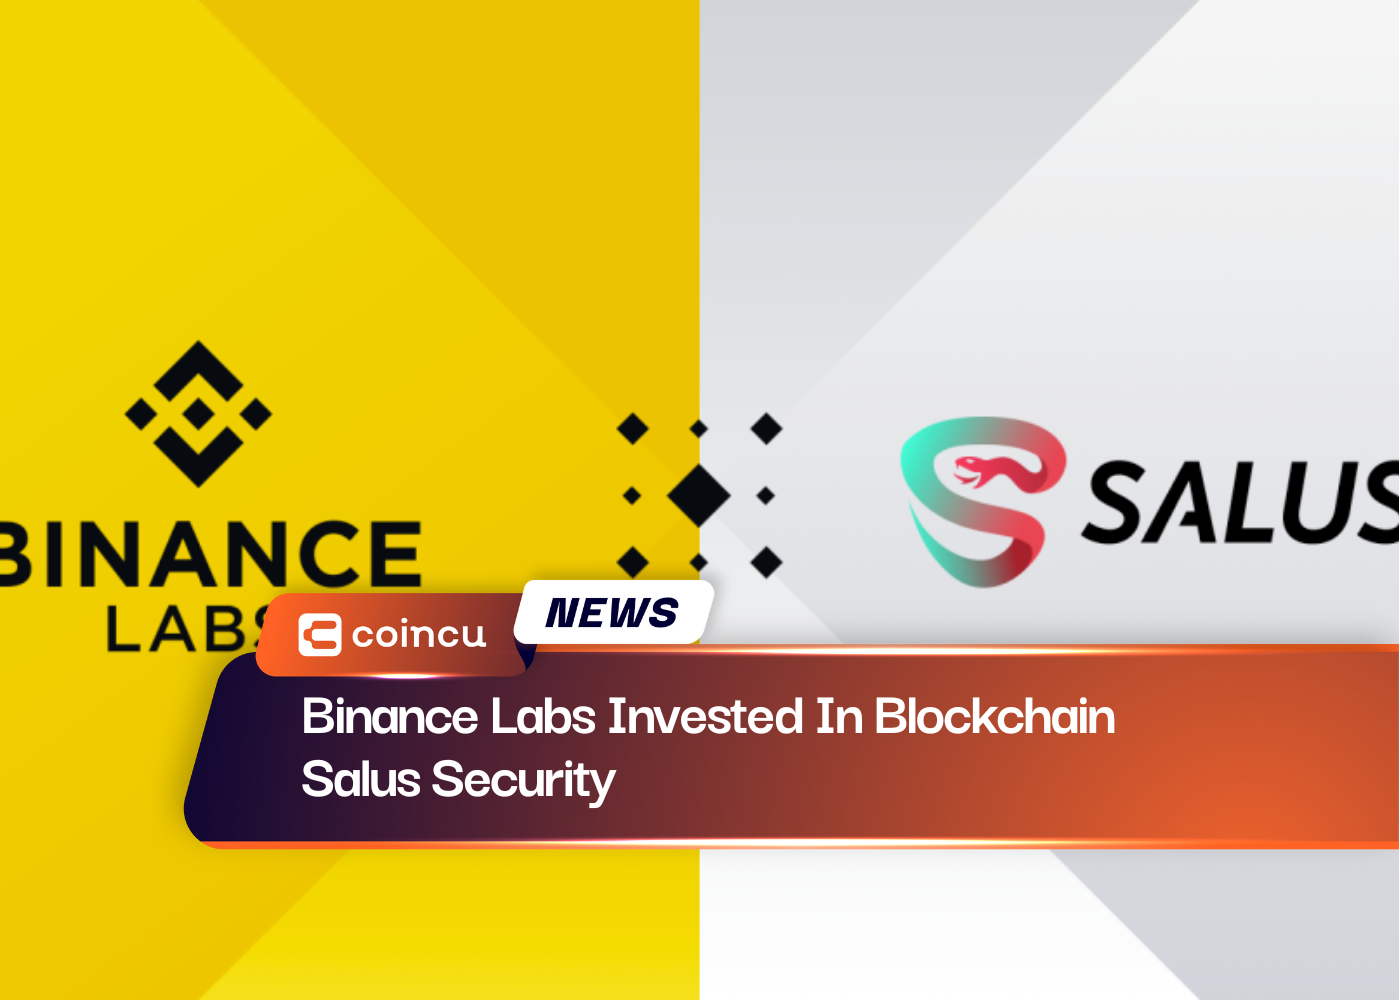 Binance Labs Invested In Blockchain Salus Security